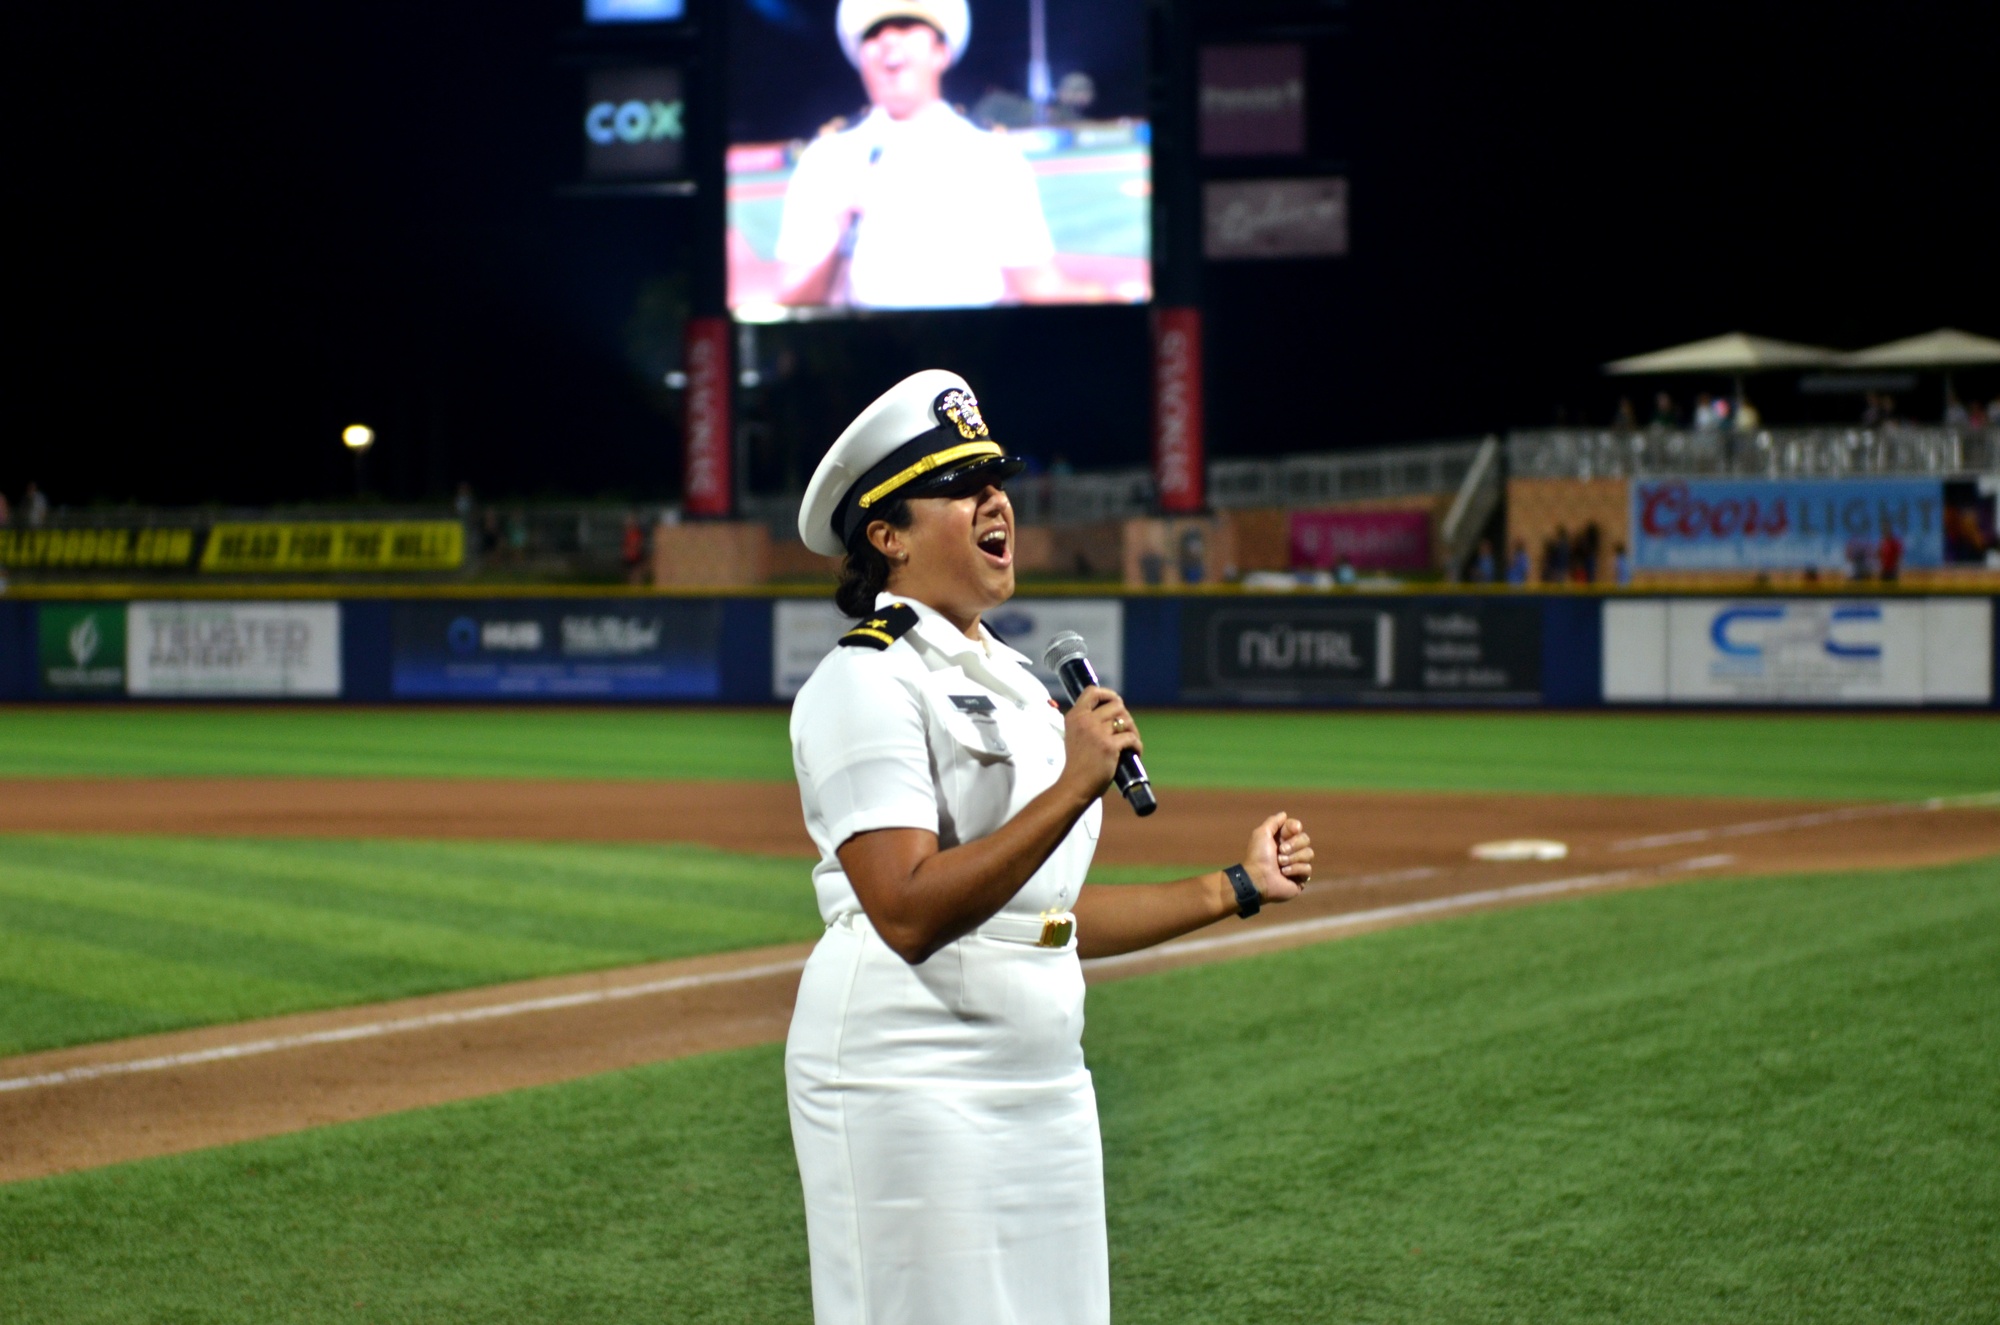 DVIDS - Images - Pensacola Blue Wahoos Salute to Service Game Aug. 18  [Image 2 of 4]